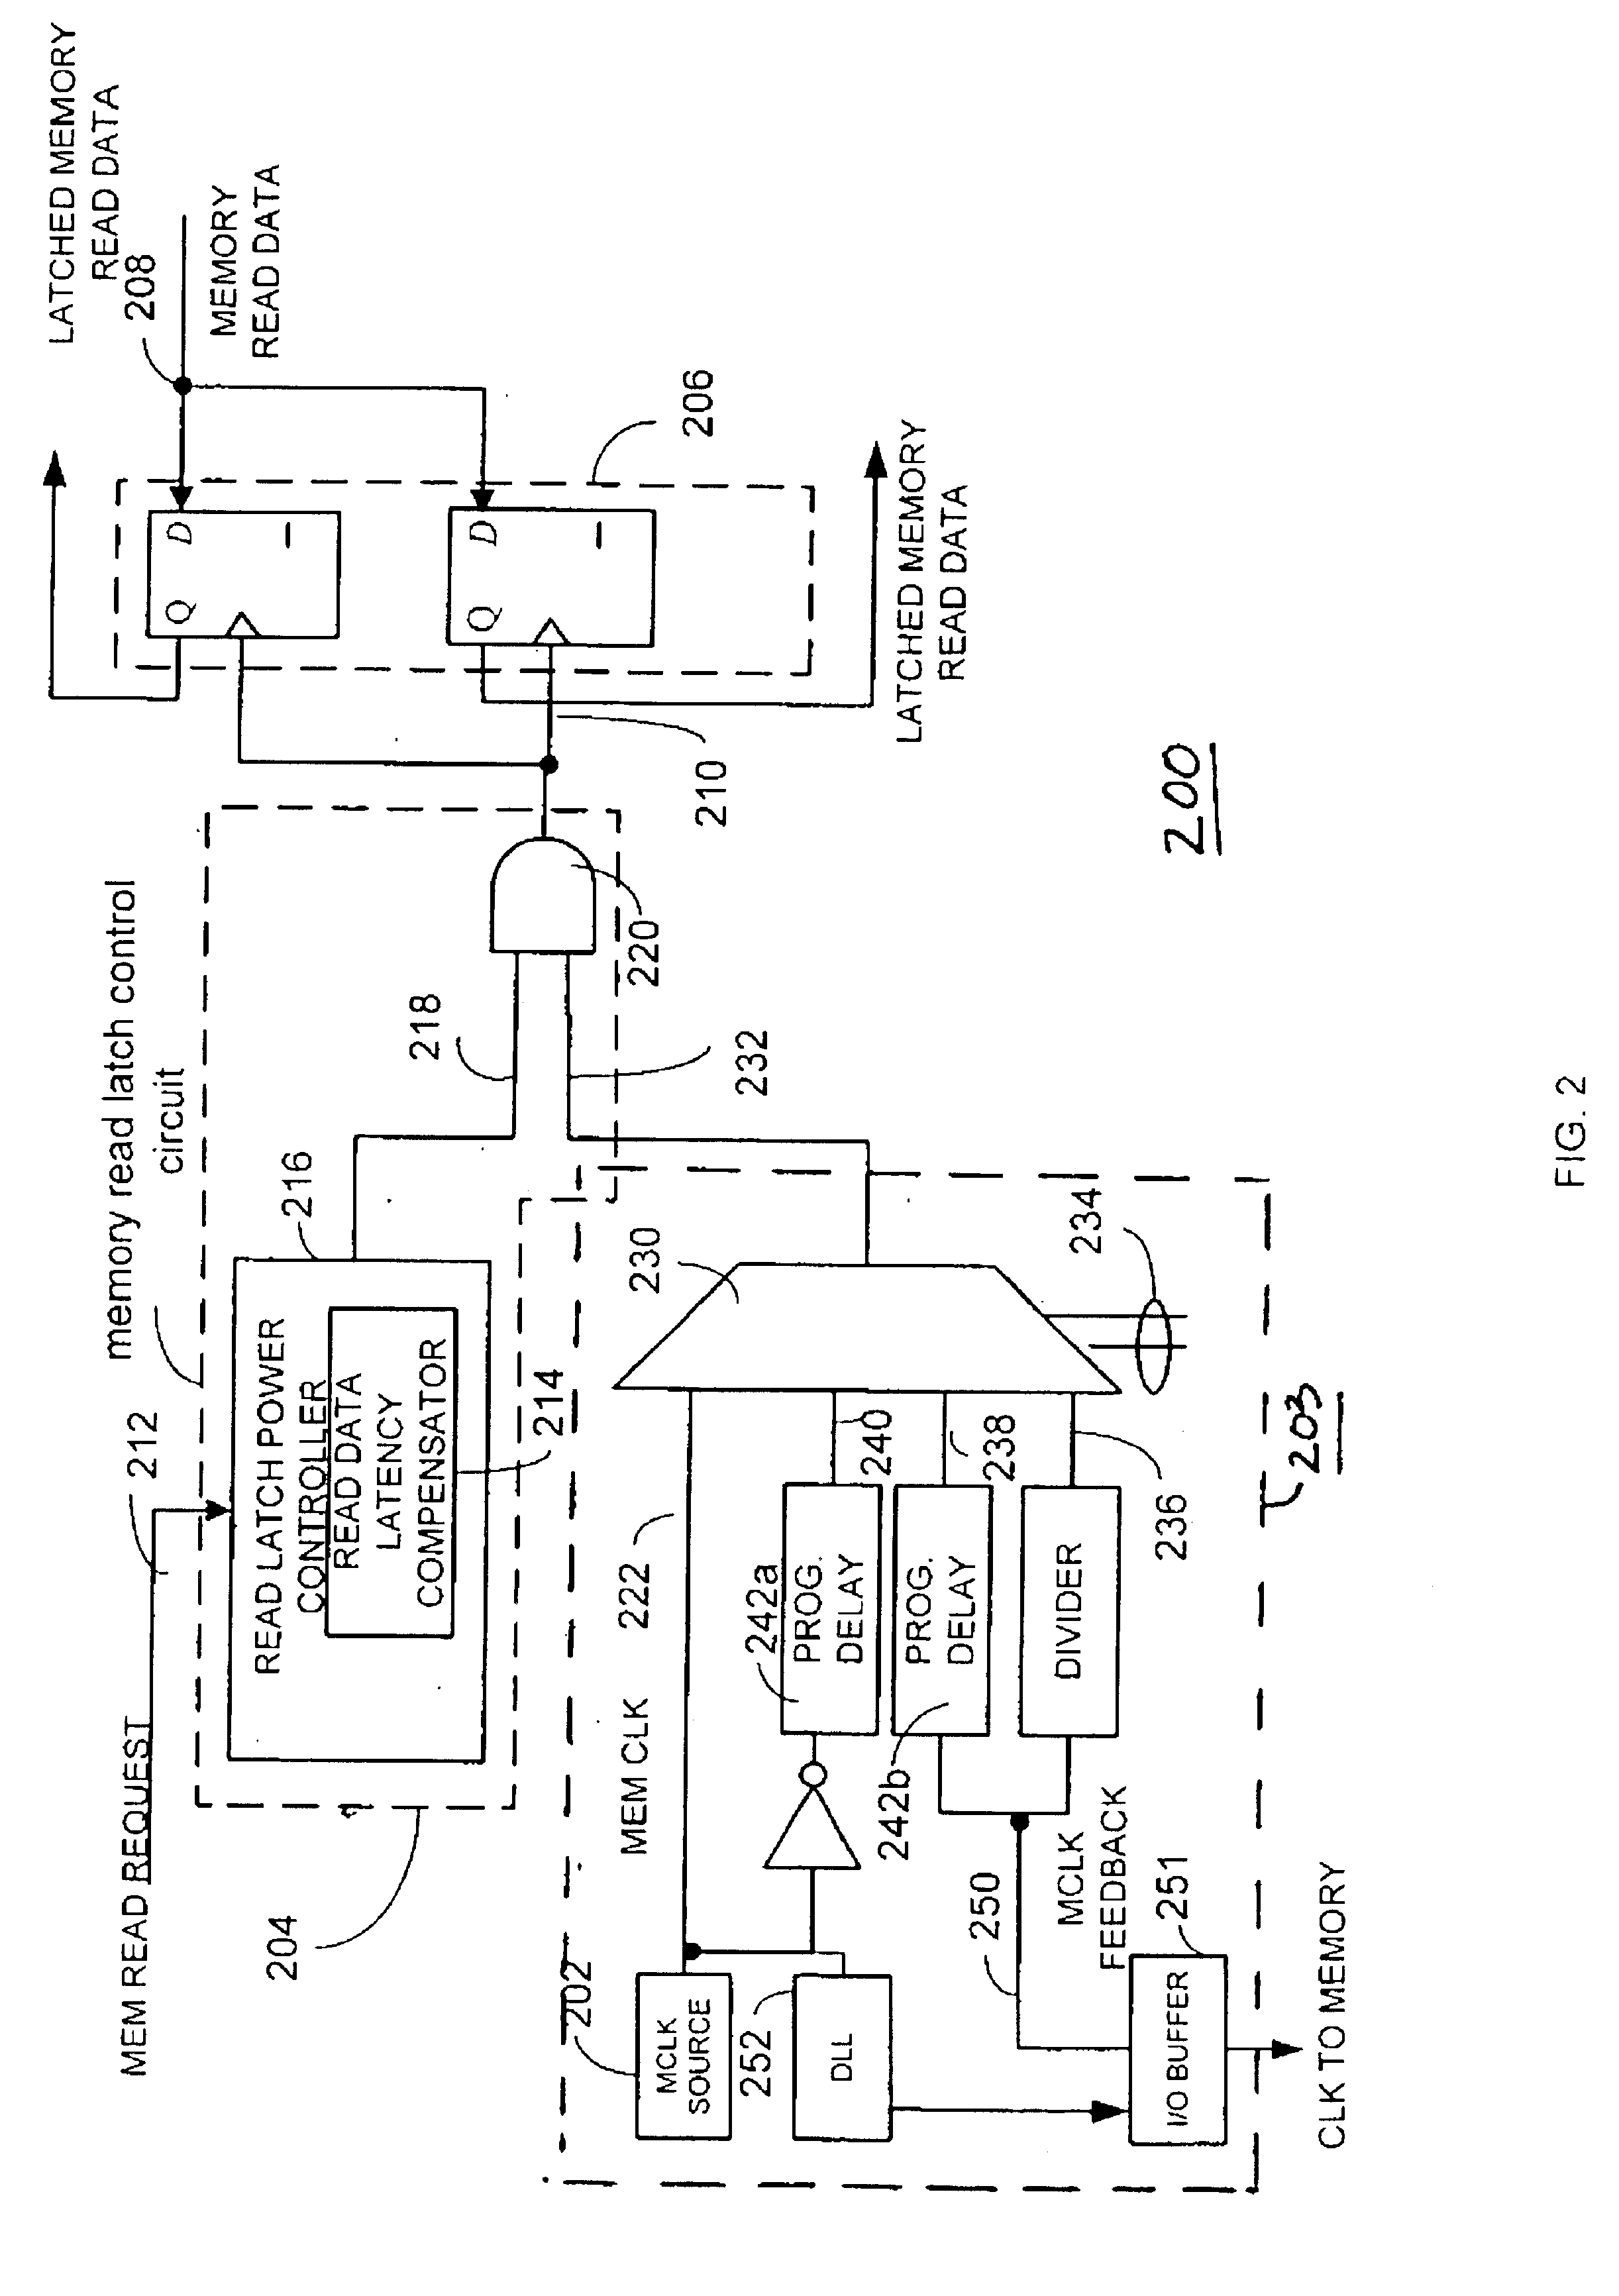 Power reduction circuit and method with multi clock branch control